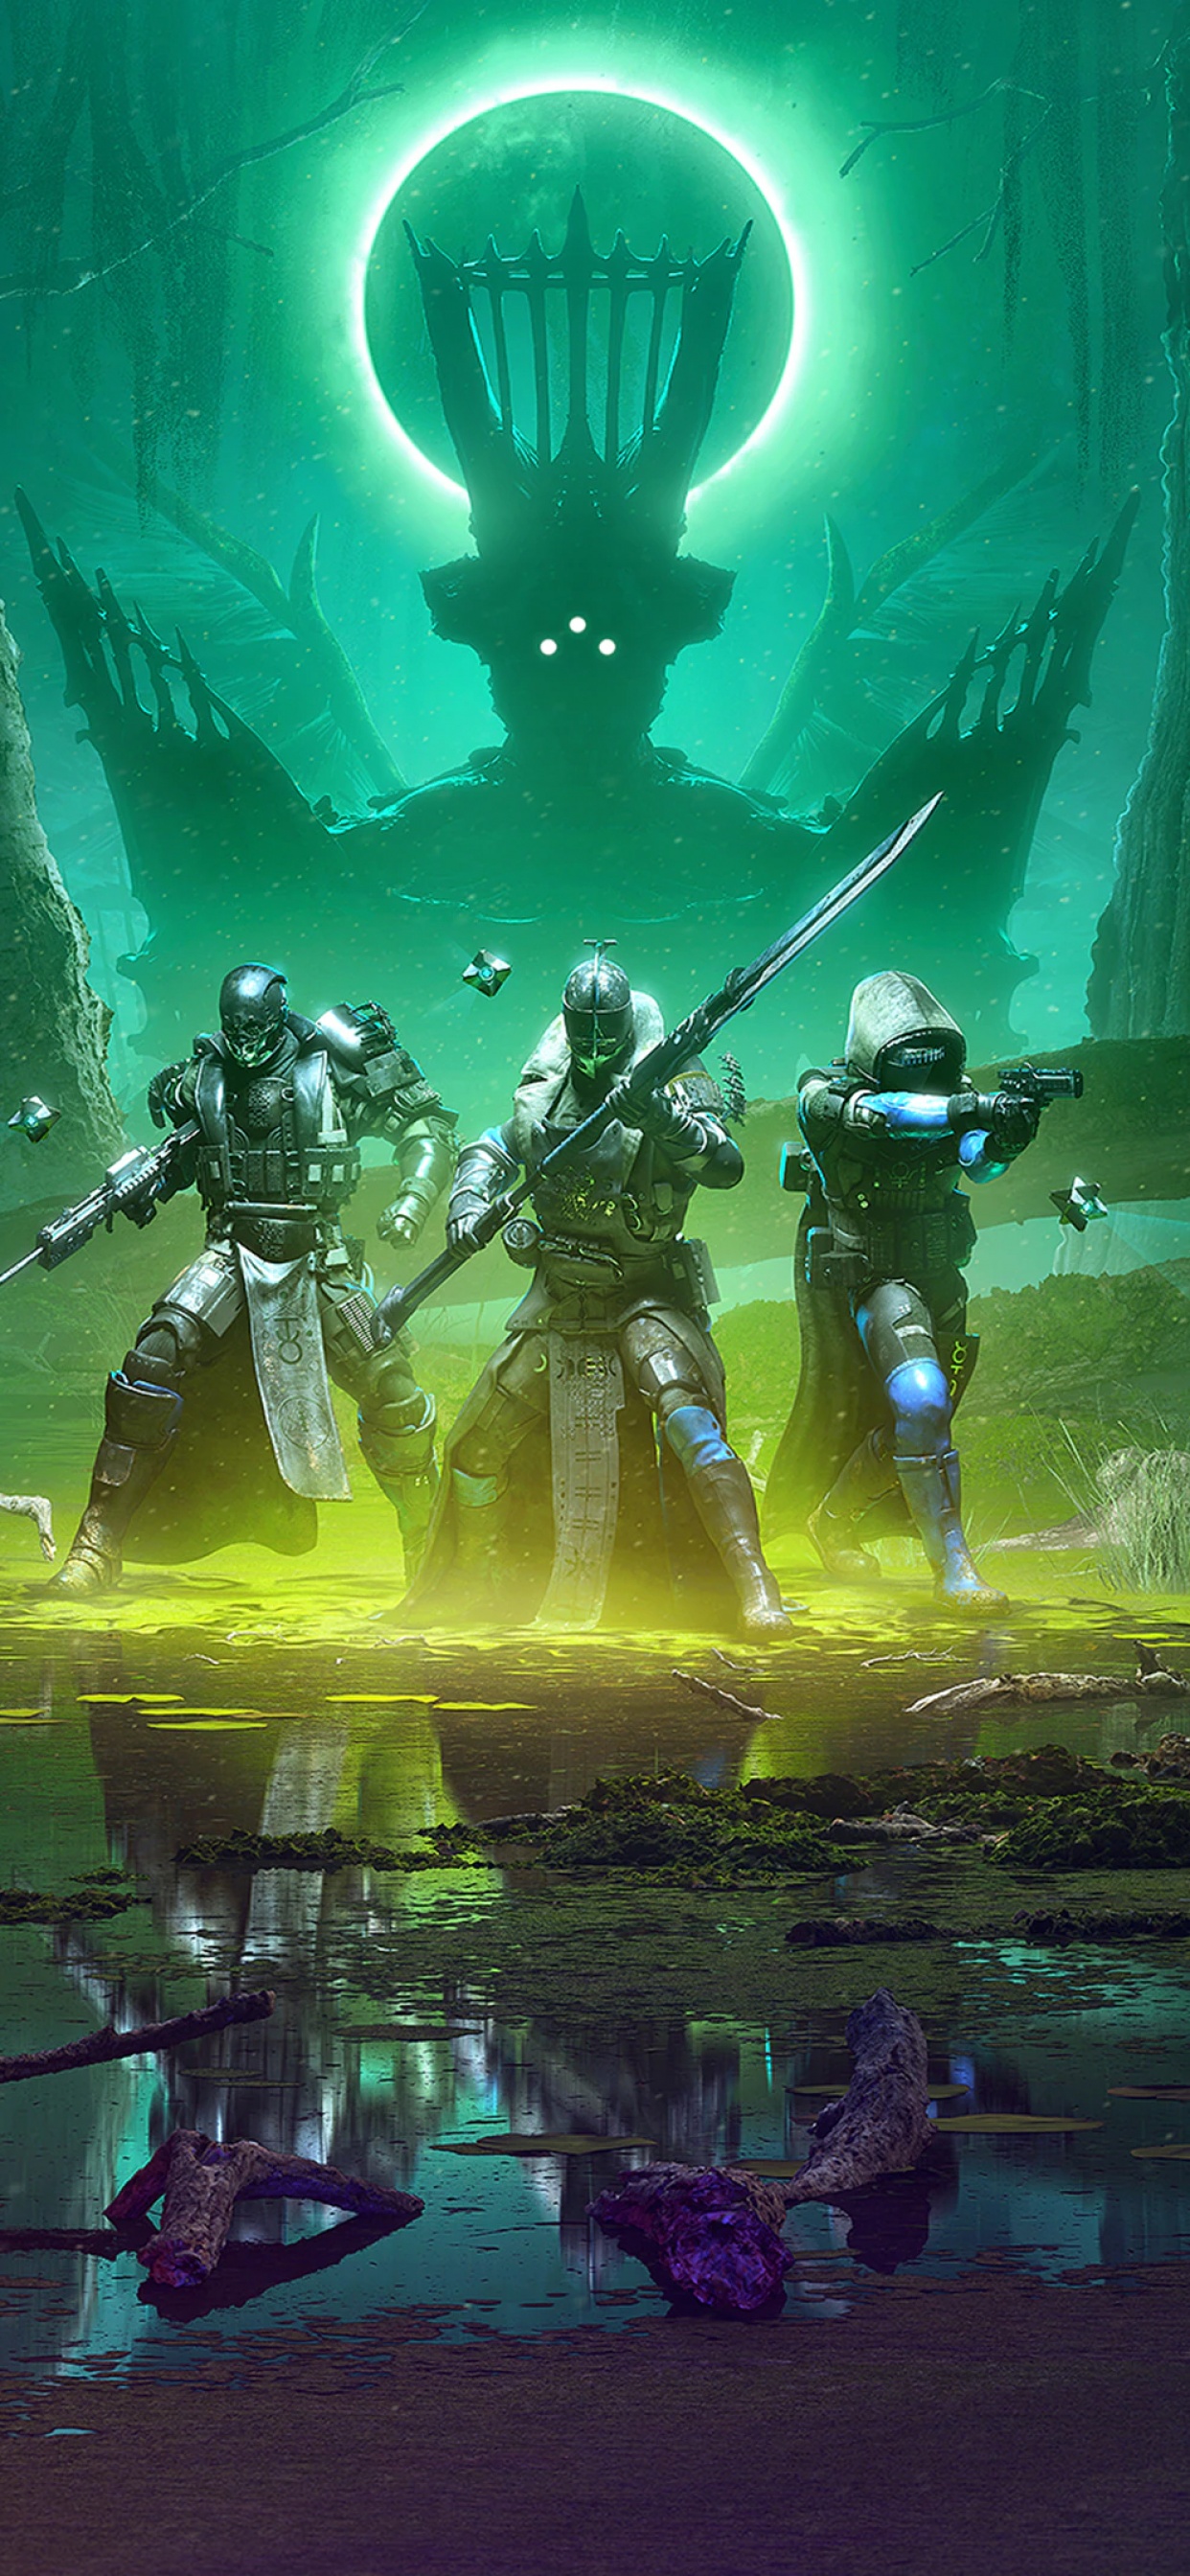 Destiny 2 The Witch Queen Wallpaper 4k Bungie 22 Games Games 6343